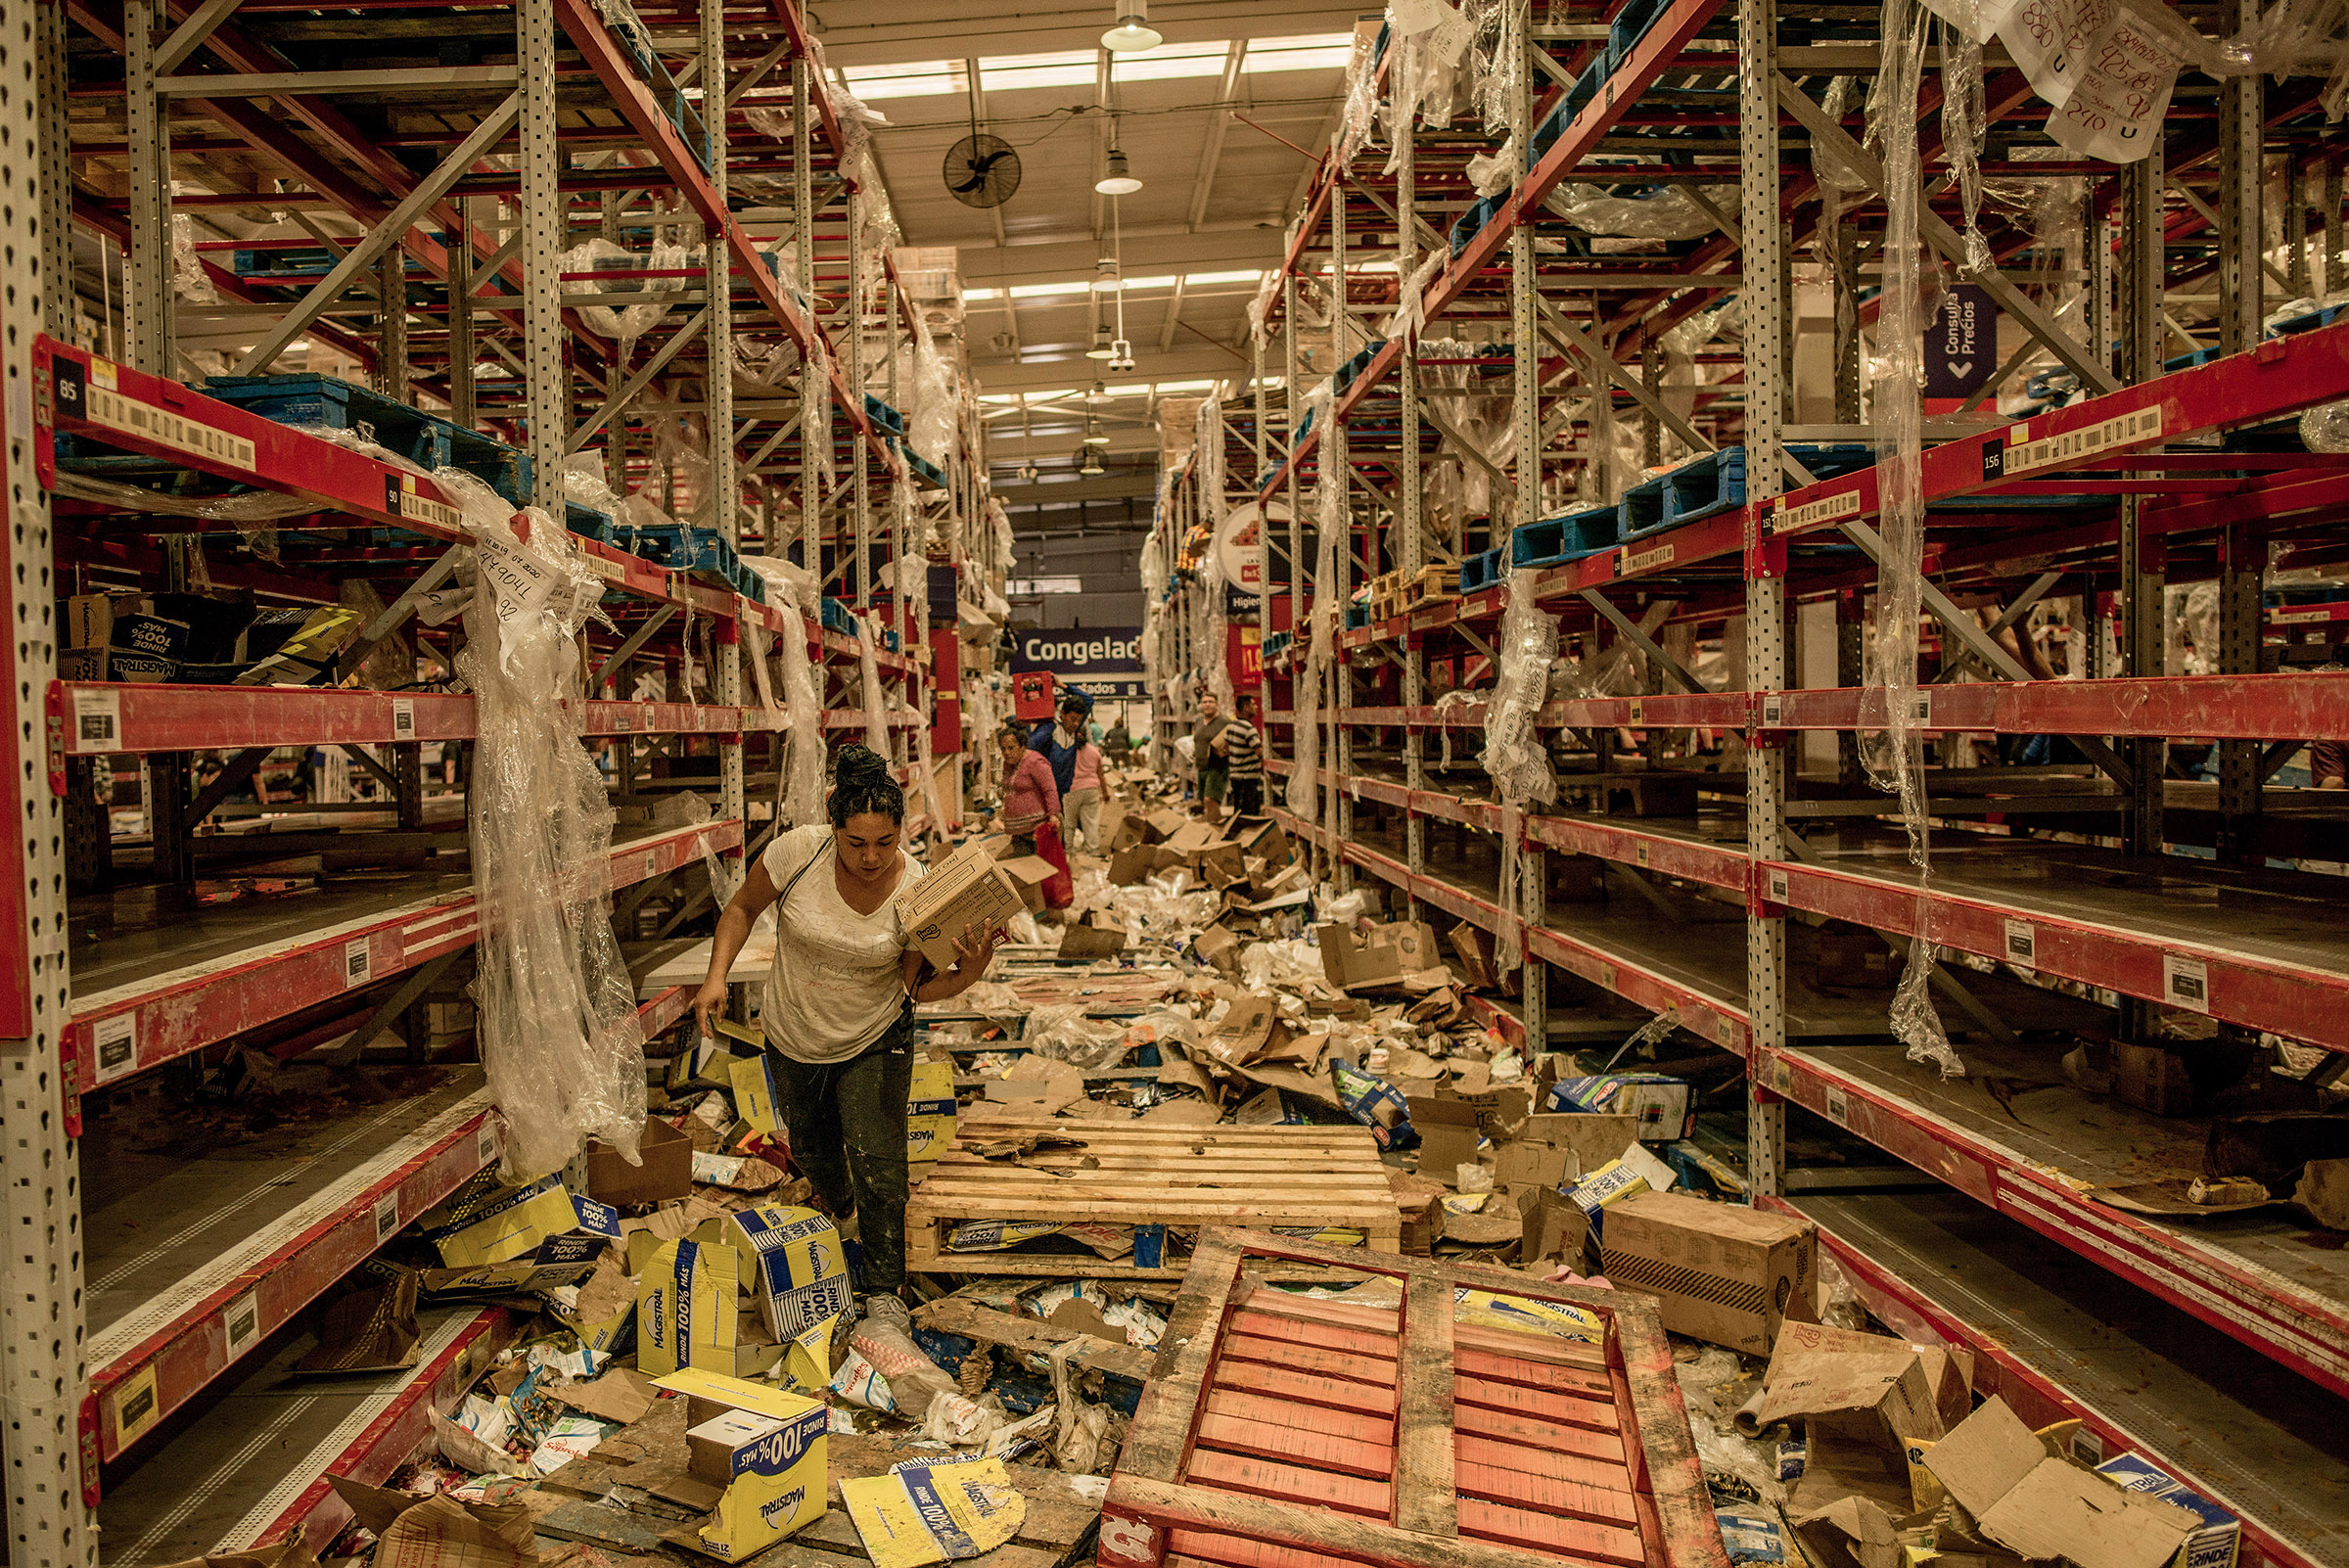 People look through the remains of a looted supermarket in Santiago, Chile, on Oct. 23, 2019. (Tomas Munita—The New York Times/Redux)